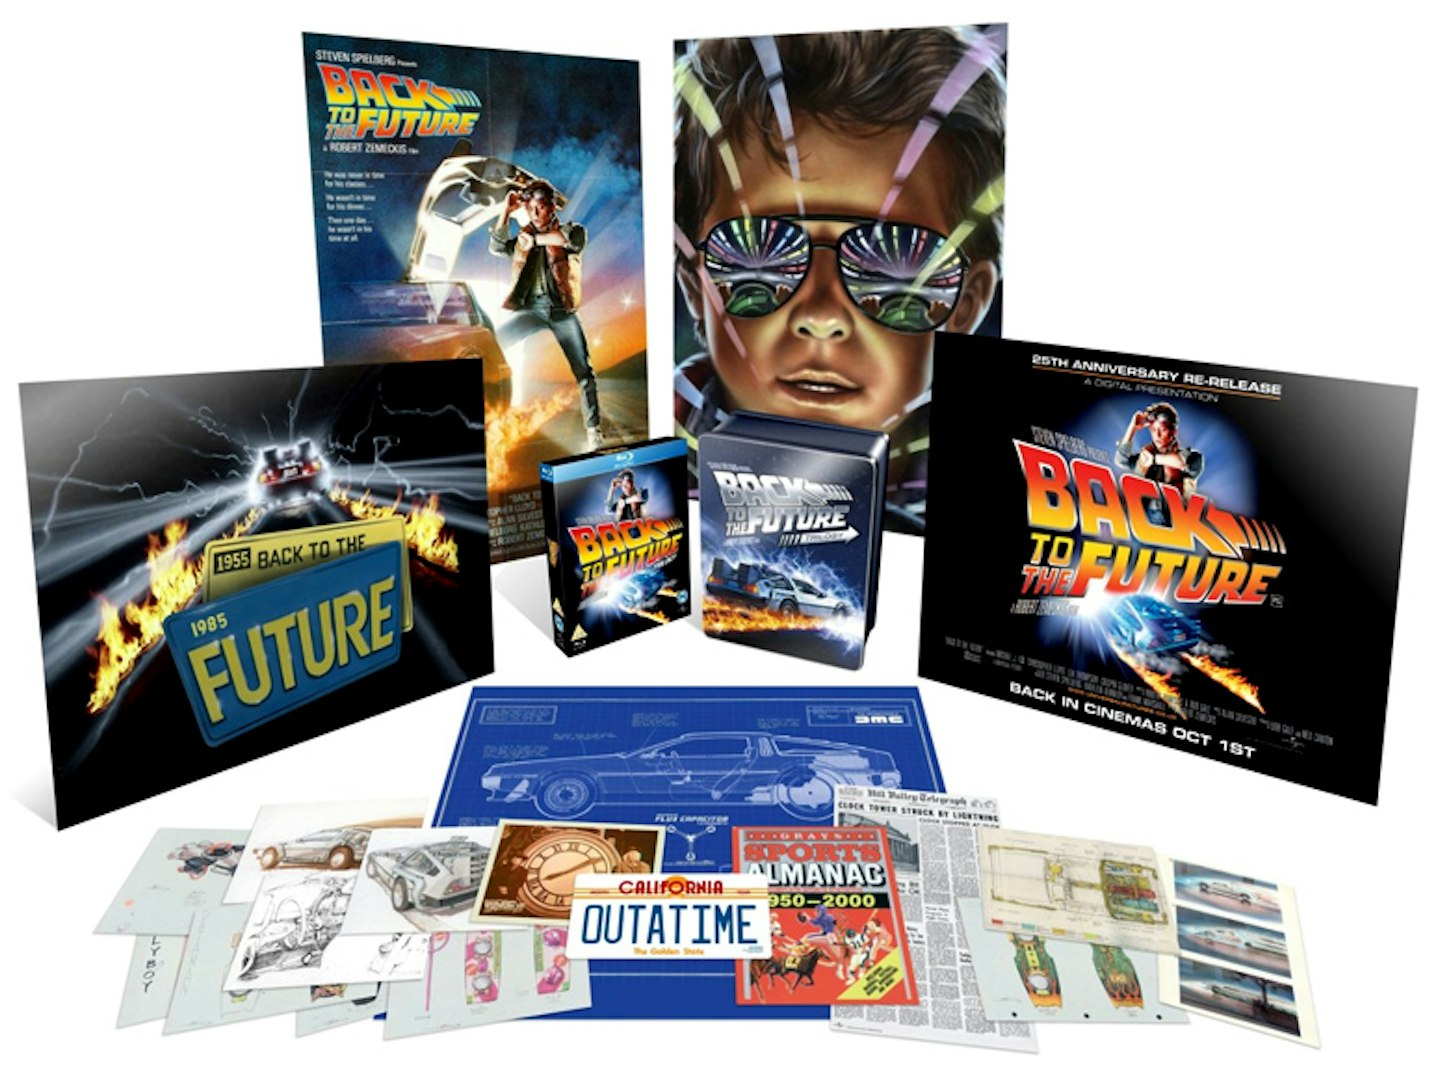 Cool Stuff: The Biggest DVD Box Set Of All Time